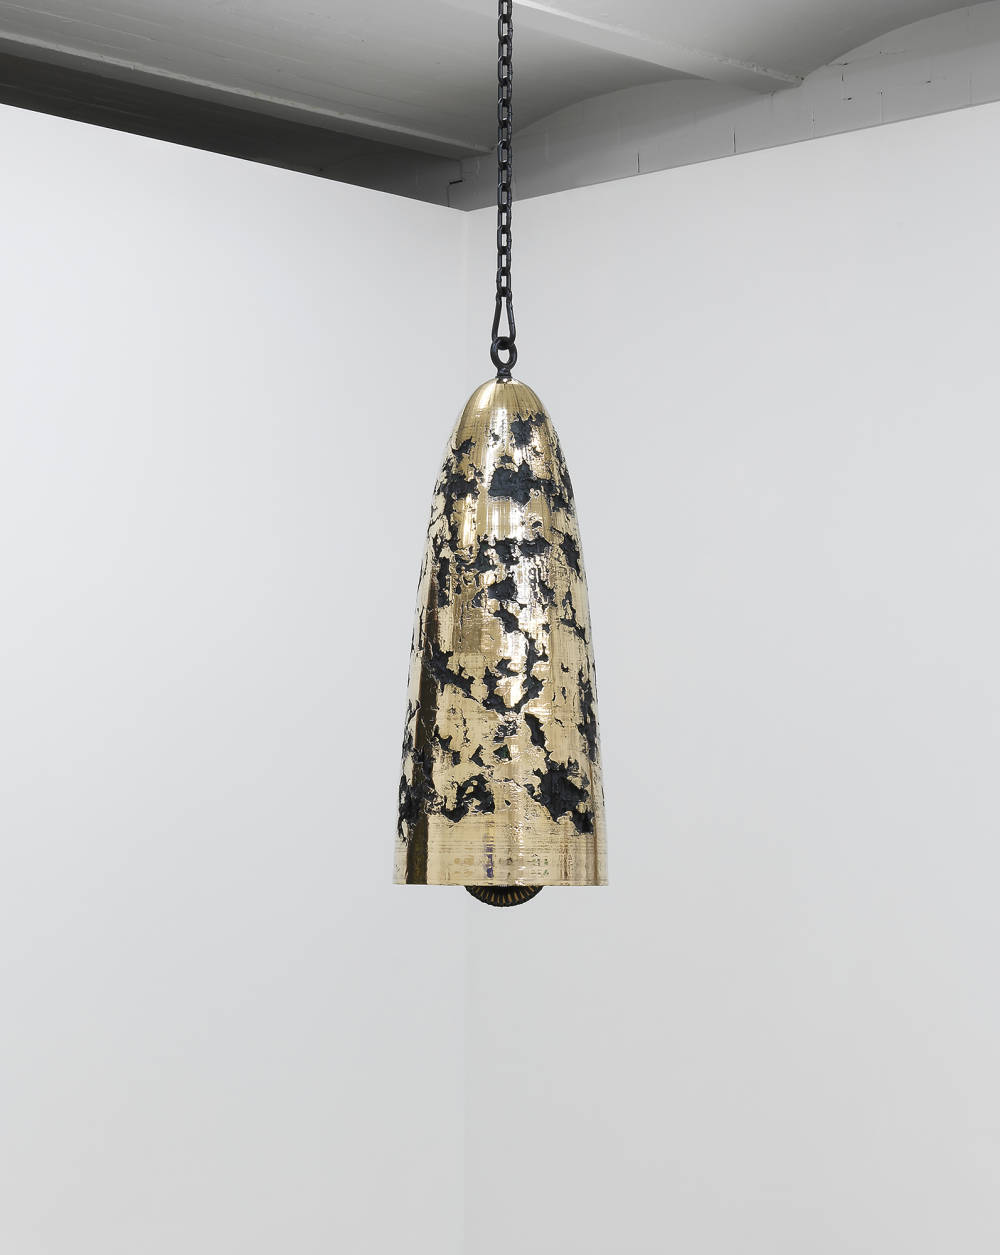 Image of a hanging bronze bell sculpture by Davina Semo, with a very reflective polished surface and dark textural pitting visible throughout